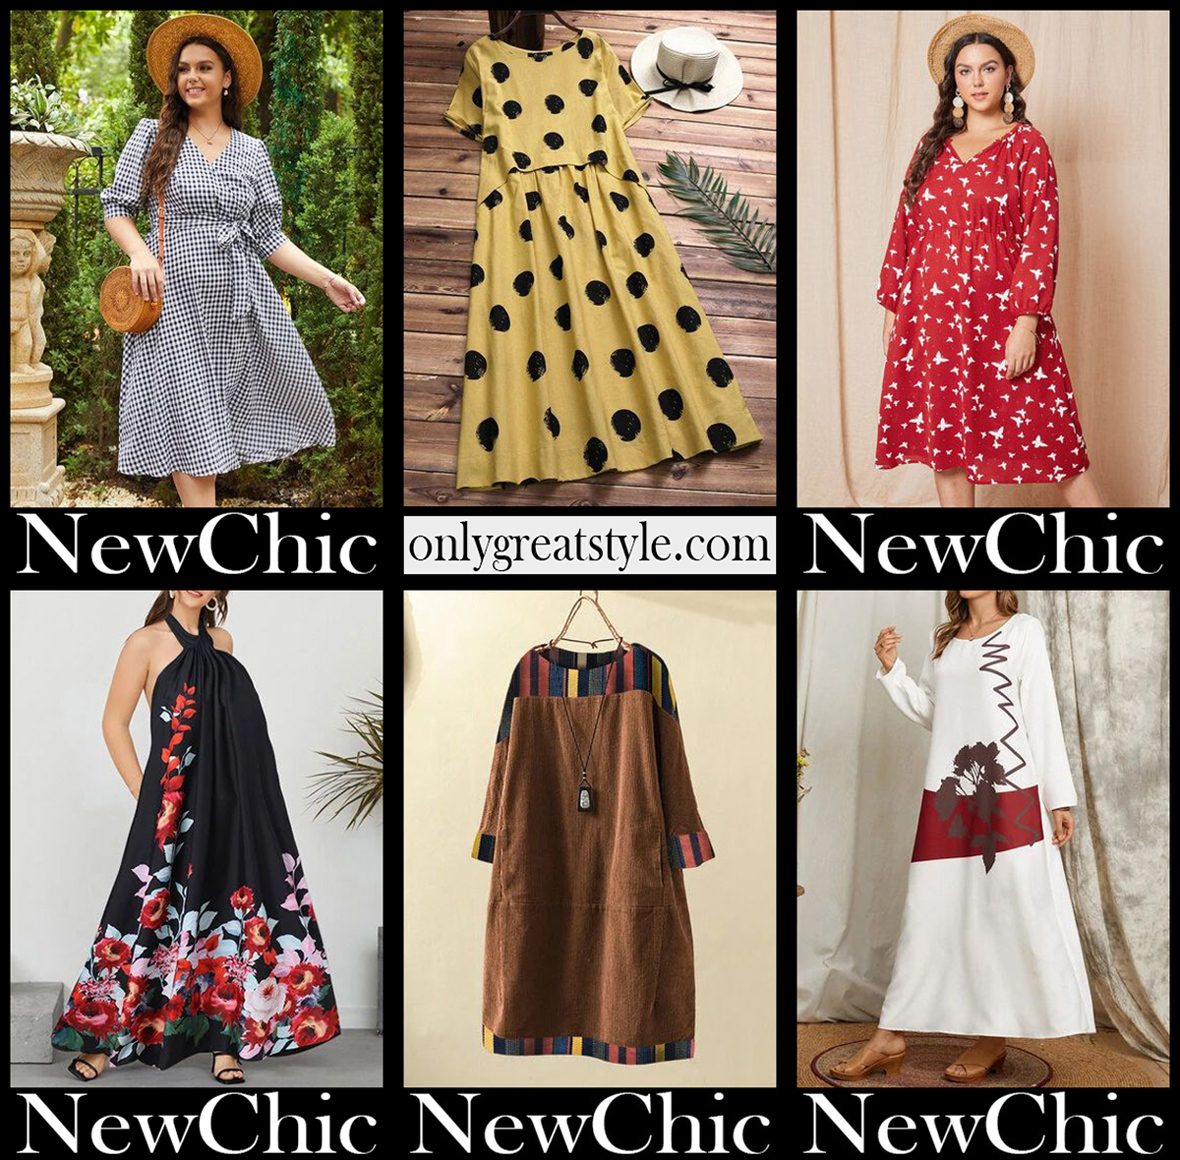 NewChic curvy dresses plus size womens clothing clothes